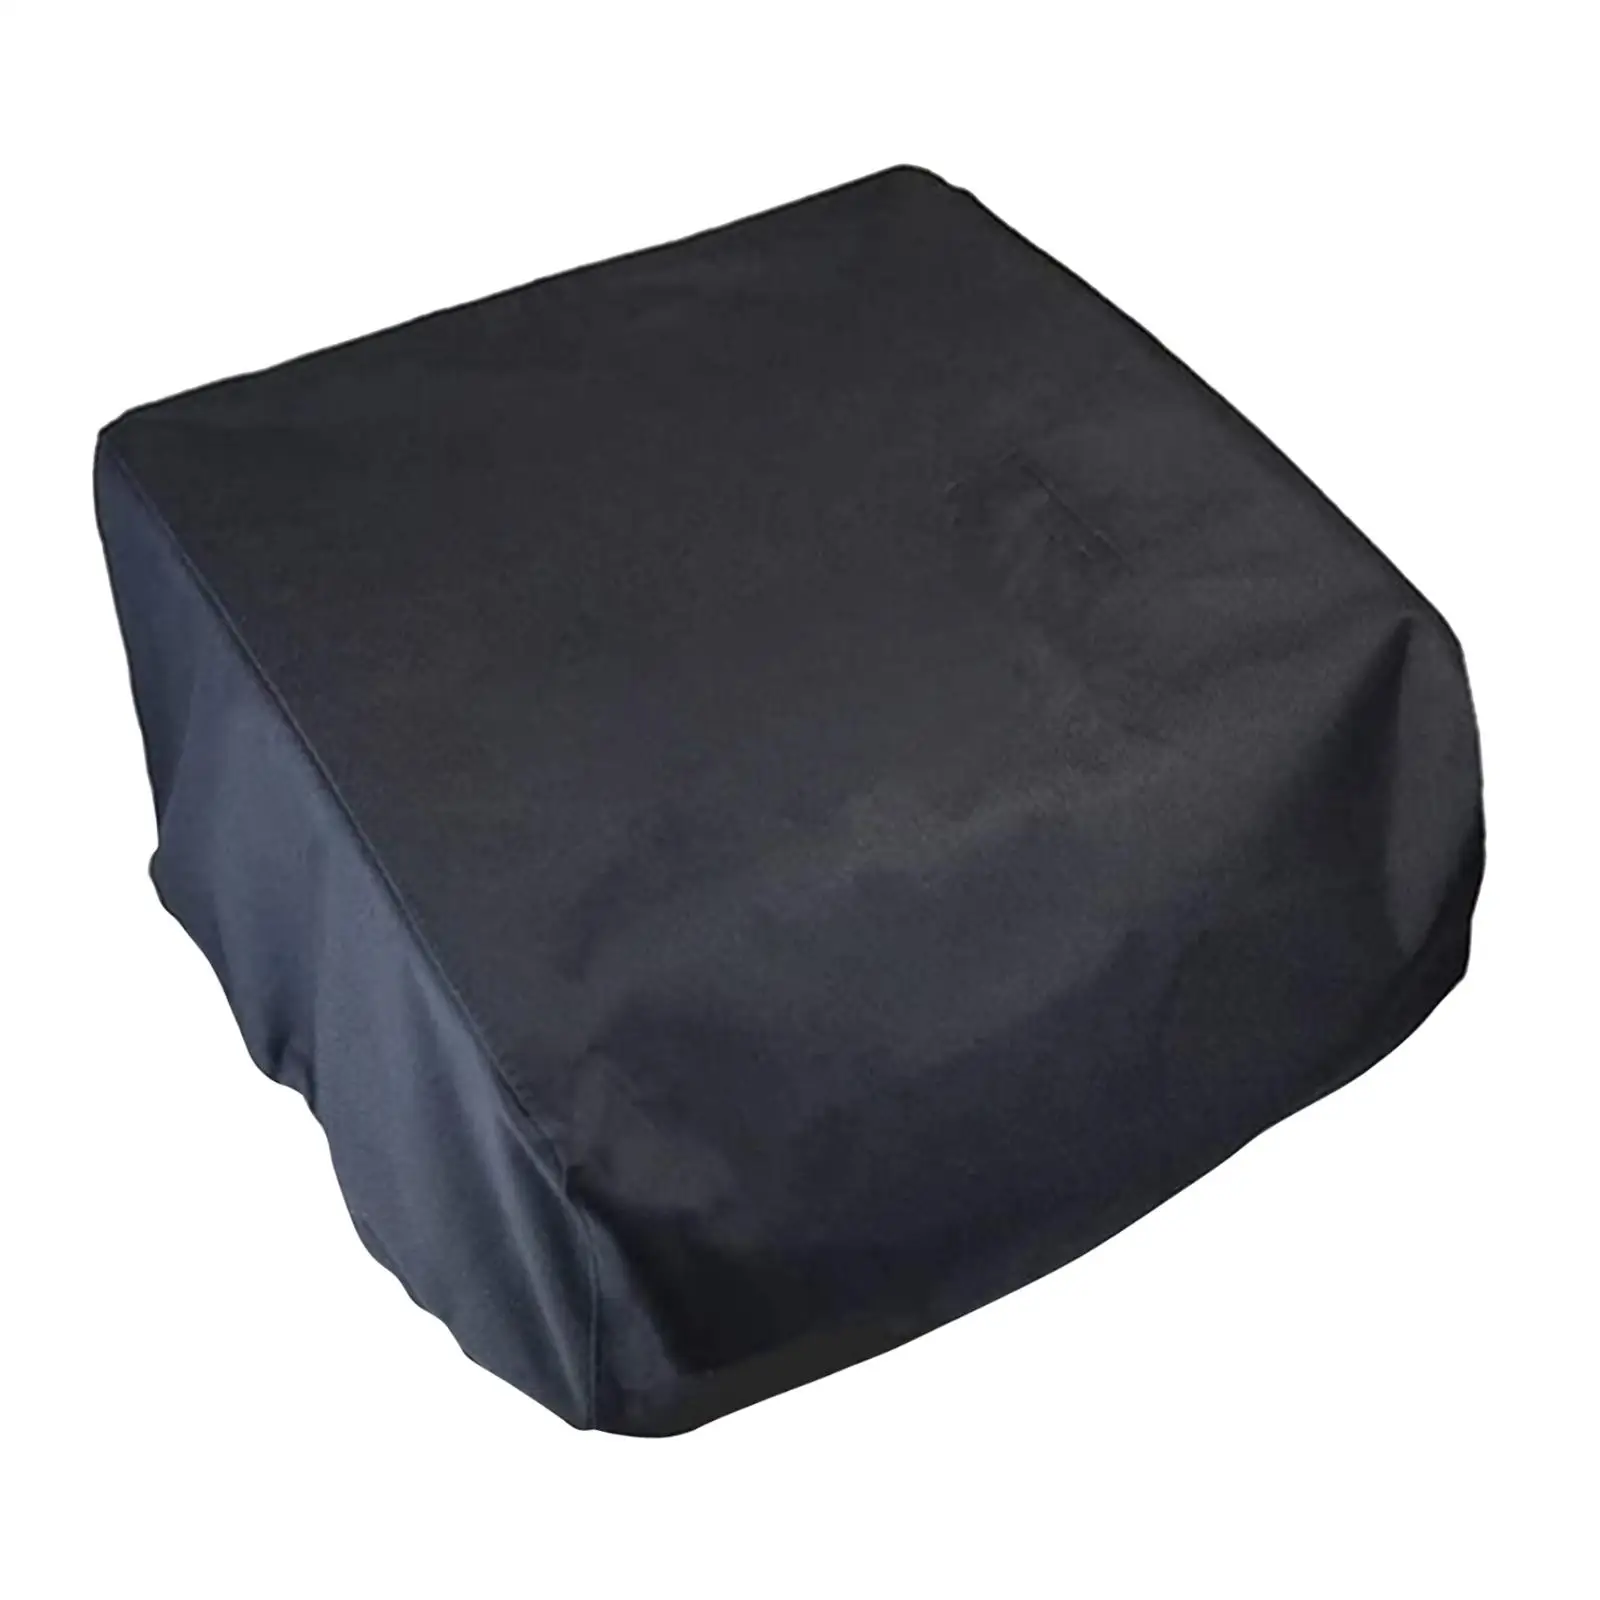 Grill Cover Dustproof Heavy Duty Portable Elastic Strap Design Outdoor Use Water Resistant for 17